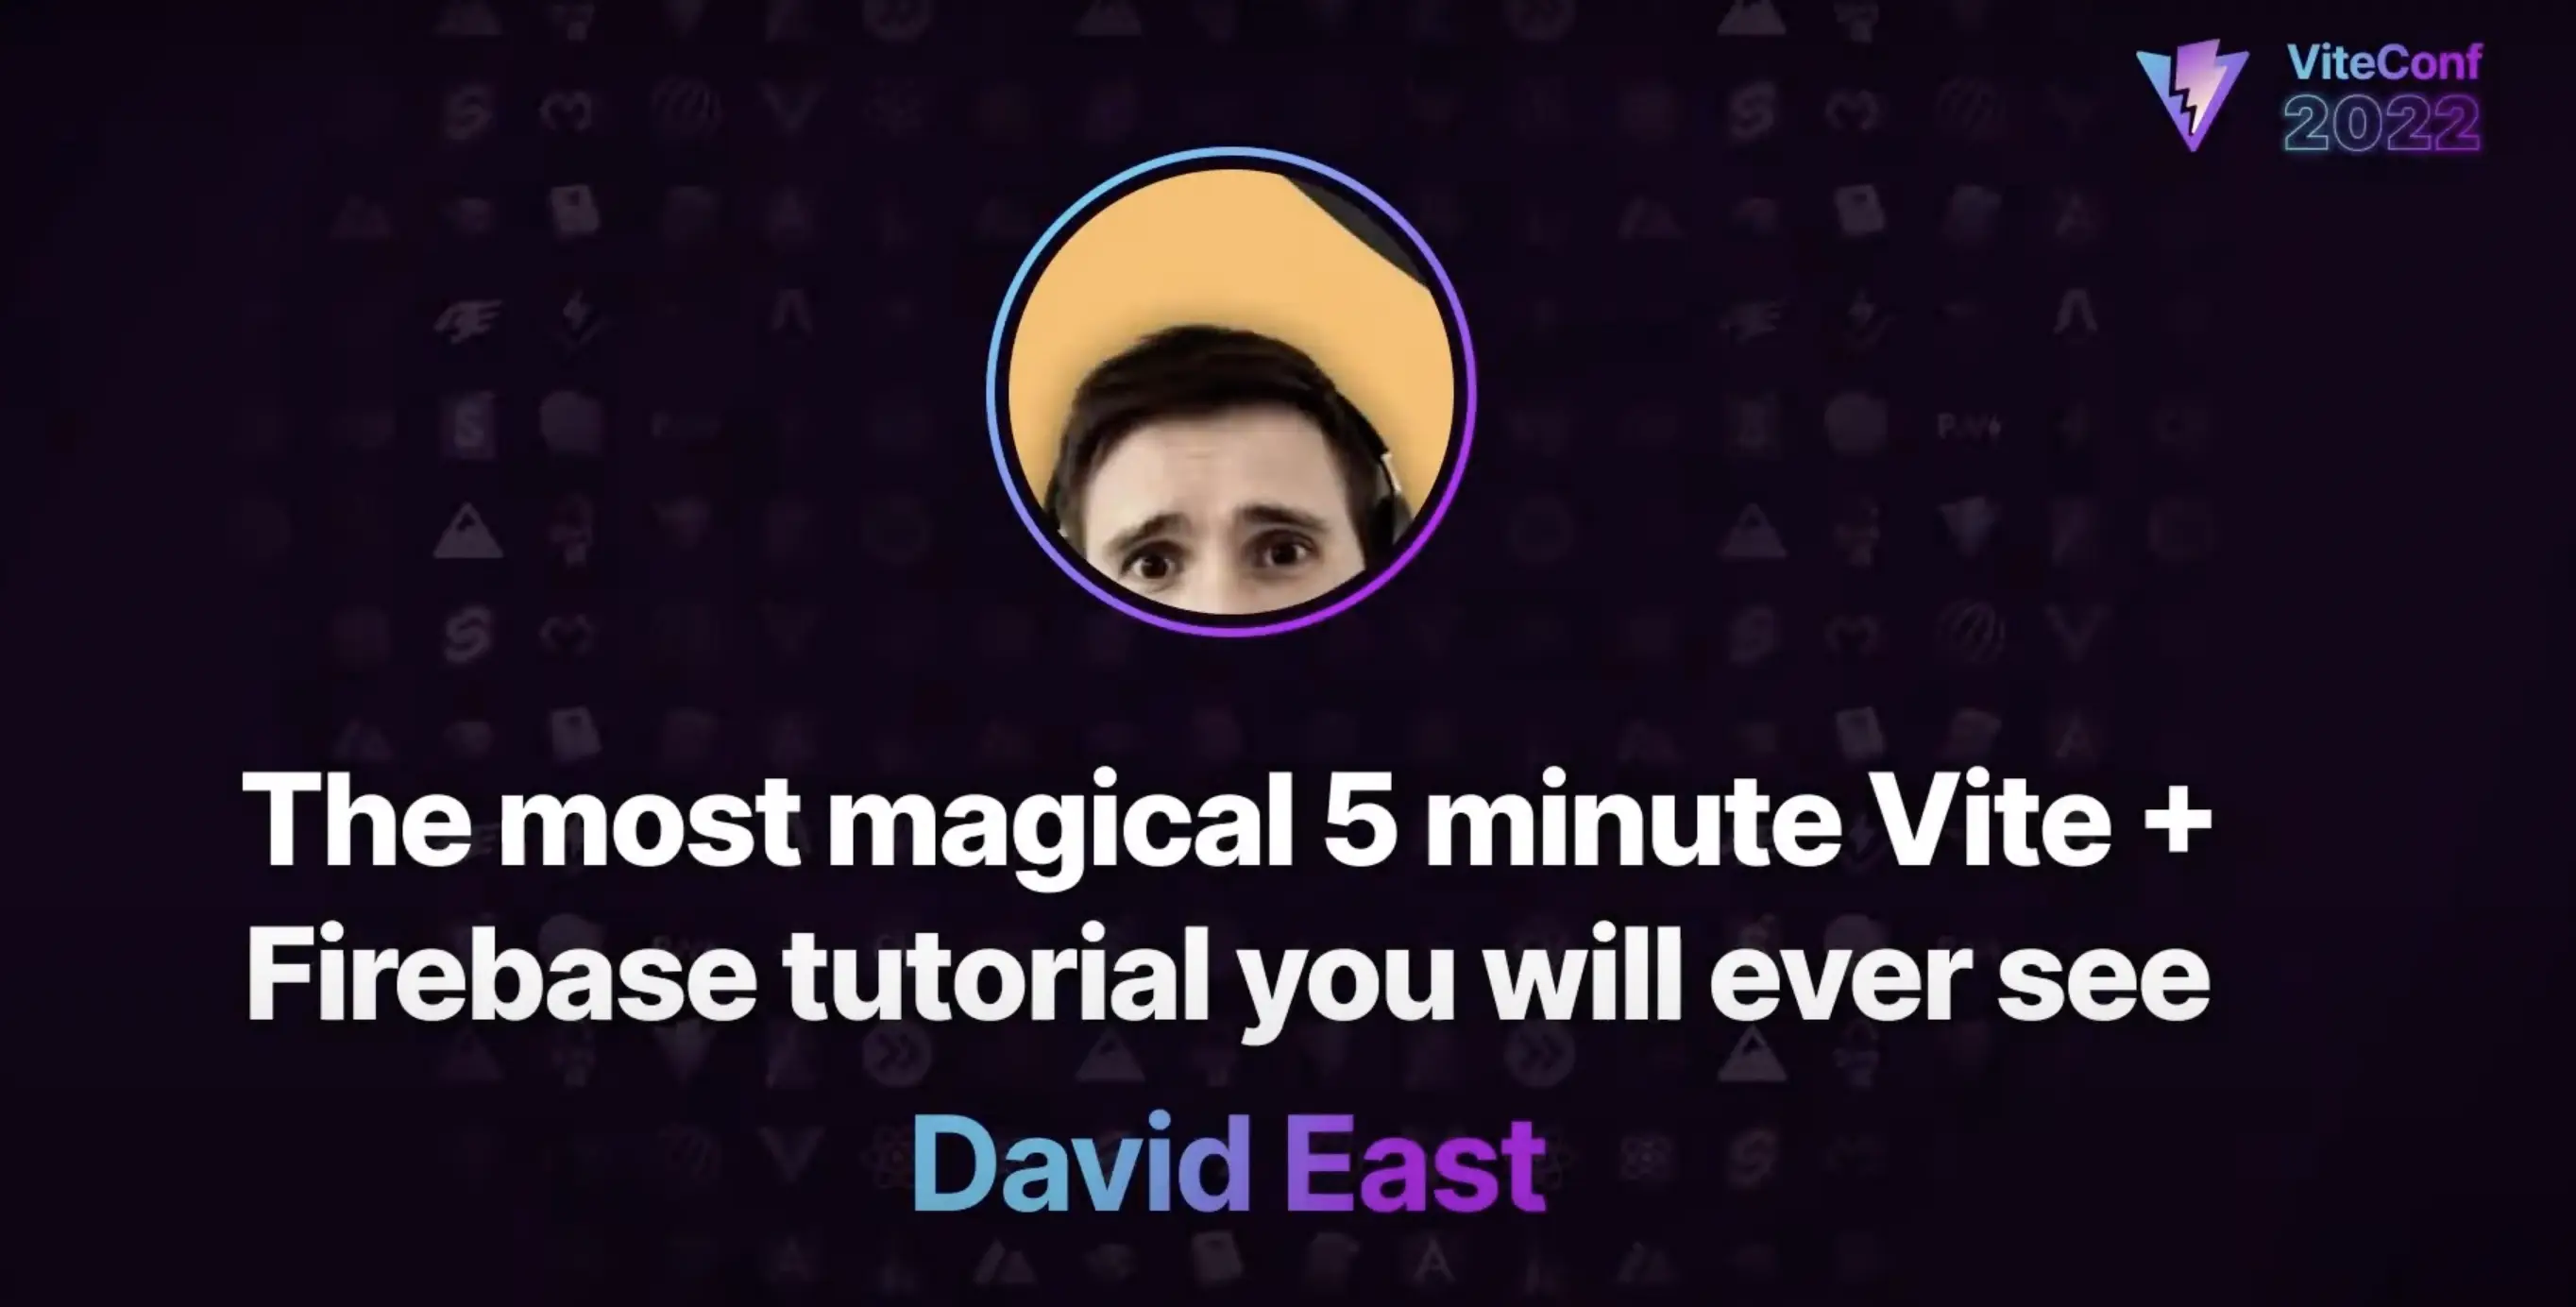 A YouTube thumb nail of David East and a title of "The most magical 5 minute Firebase + Vite talk you will ever see"